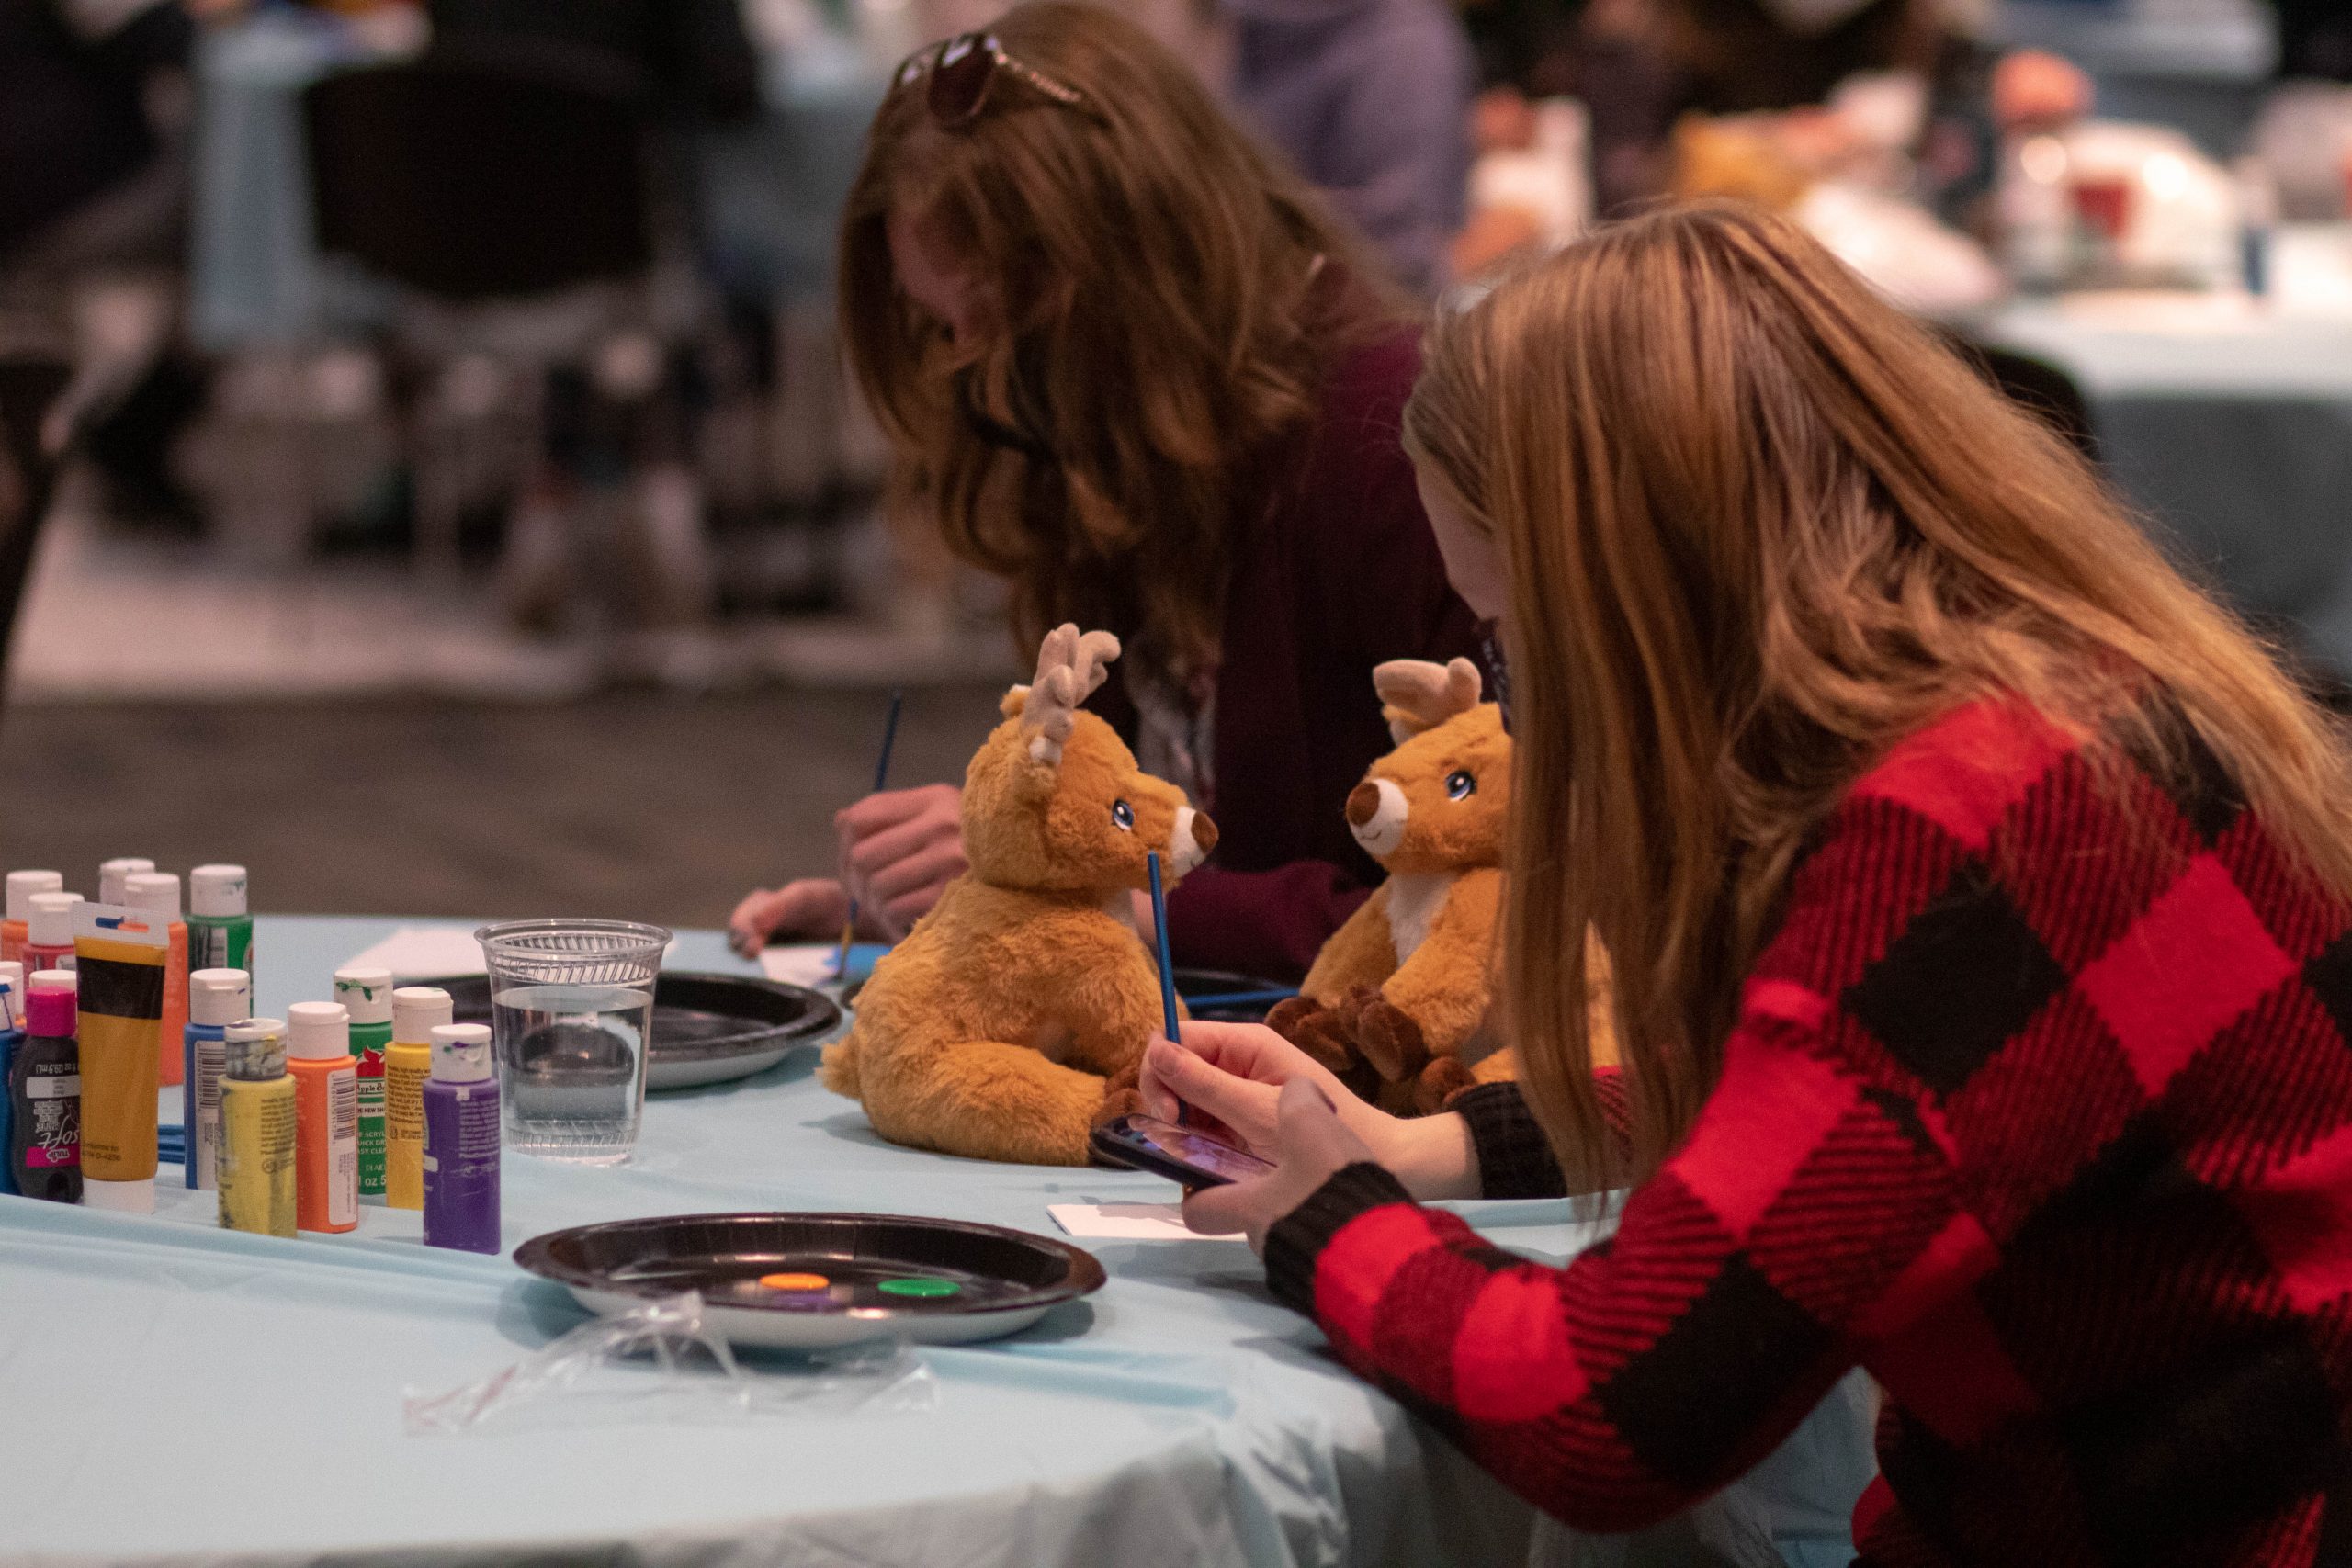 Two people having fun at the winter festival, working on crafts with their crafted stuffed animals next to them.